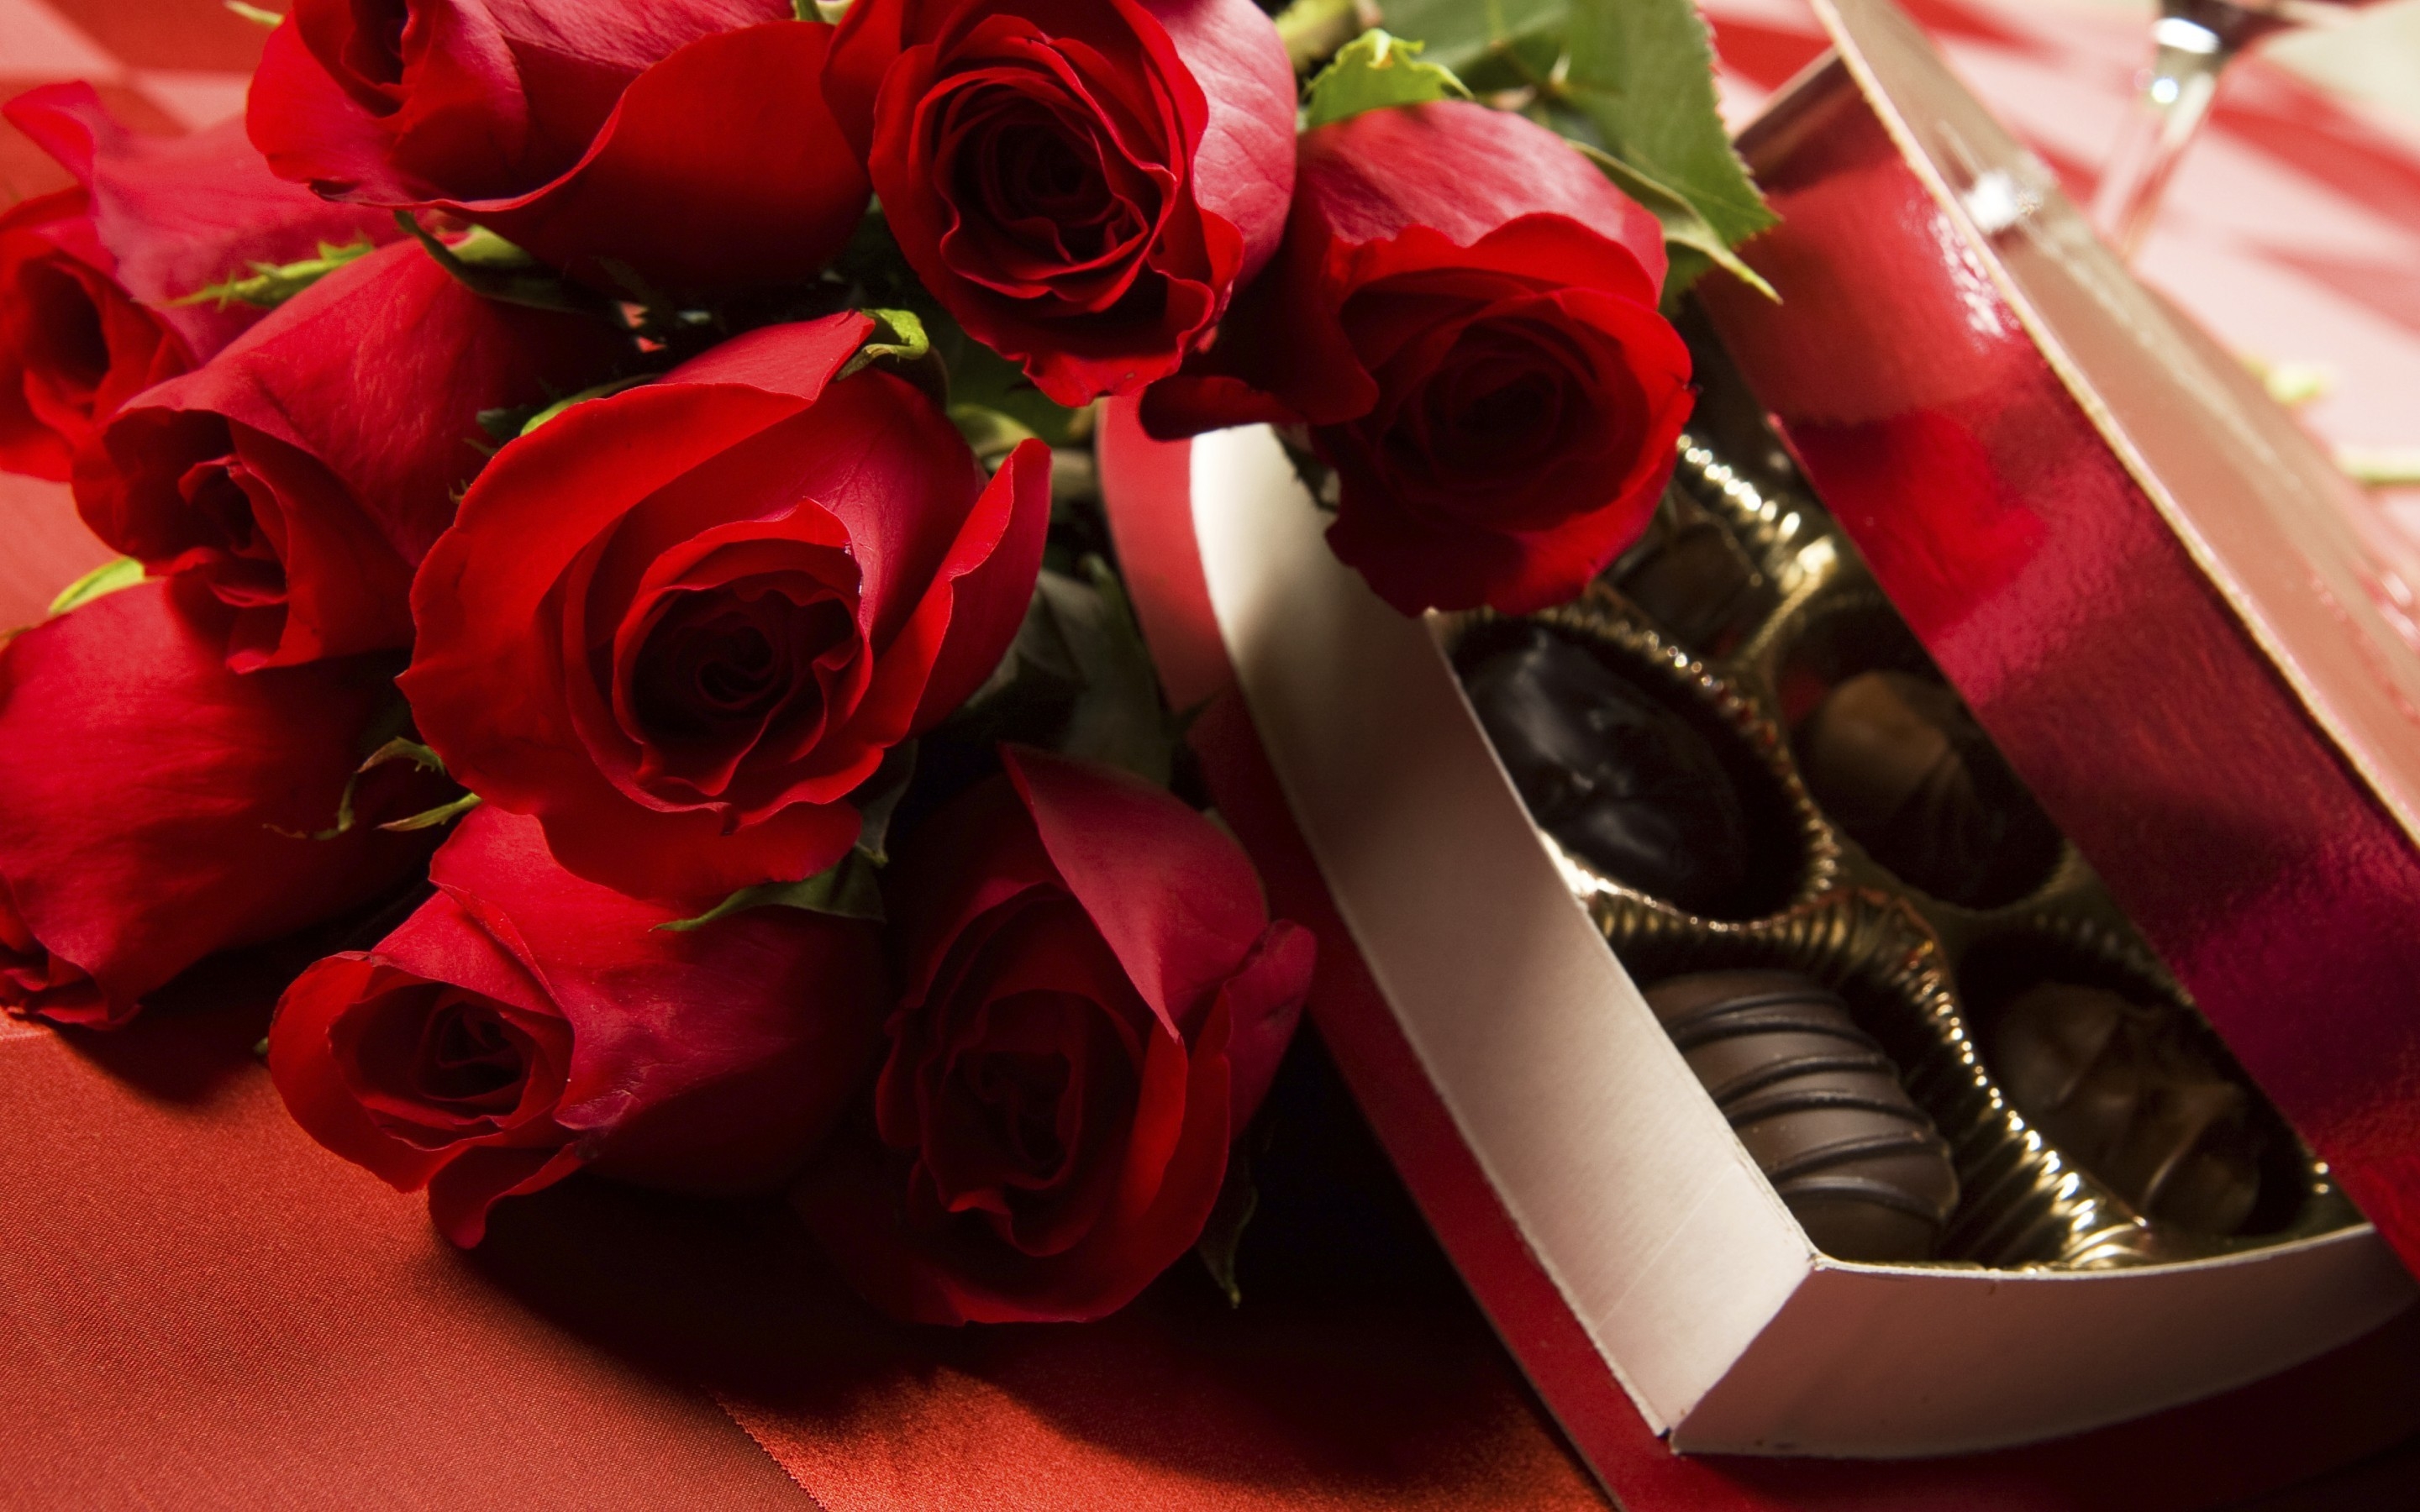 Roses And Chocolate for 2880 x 1800 Retina Display resolution